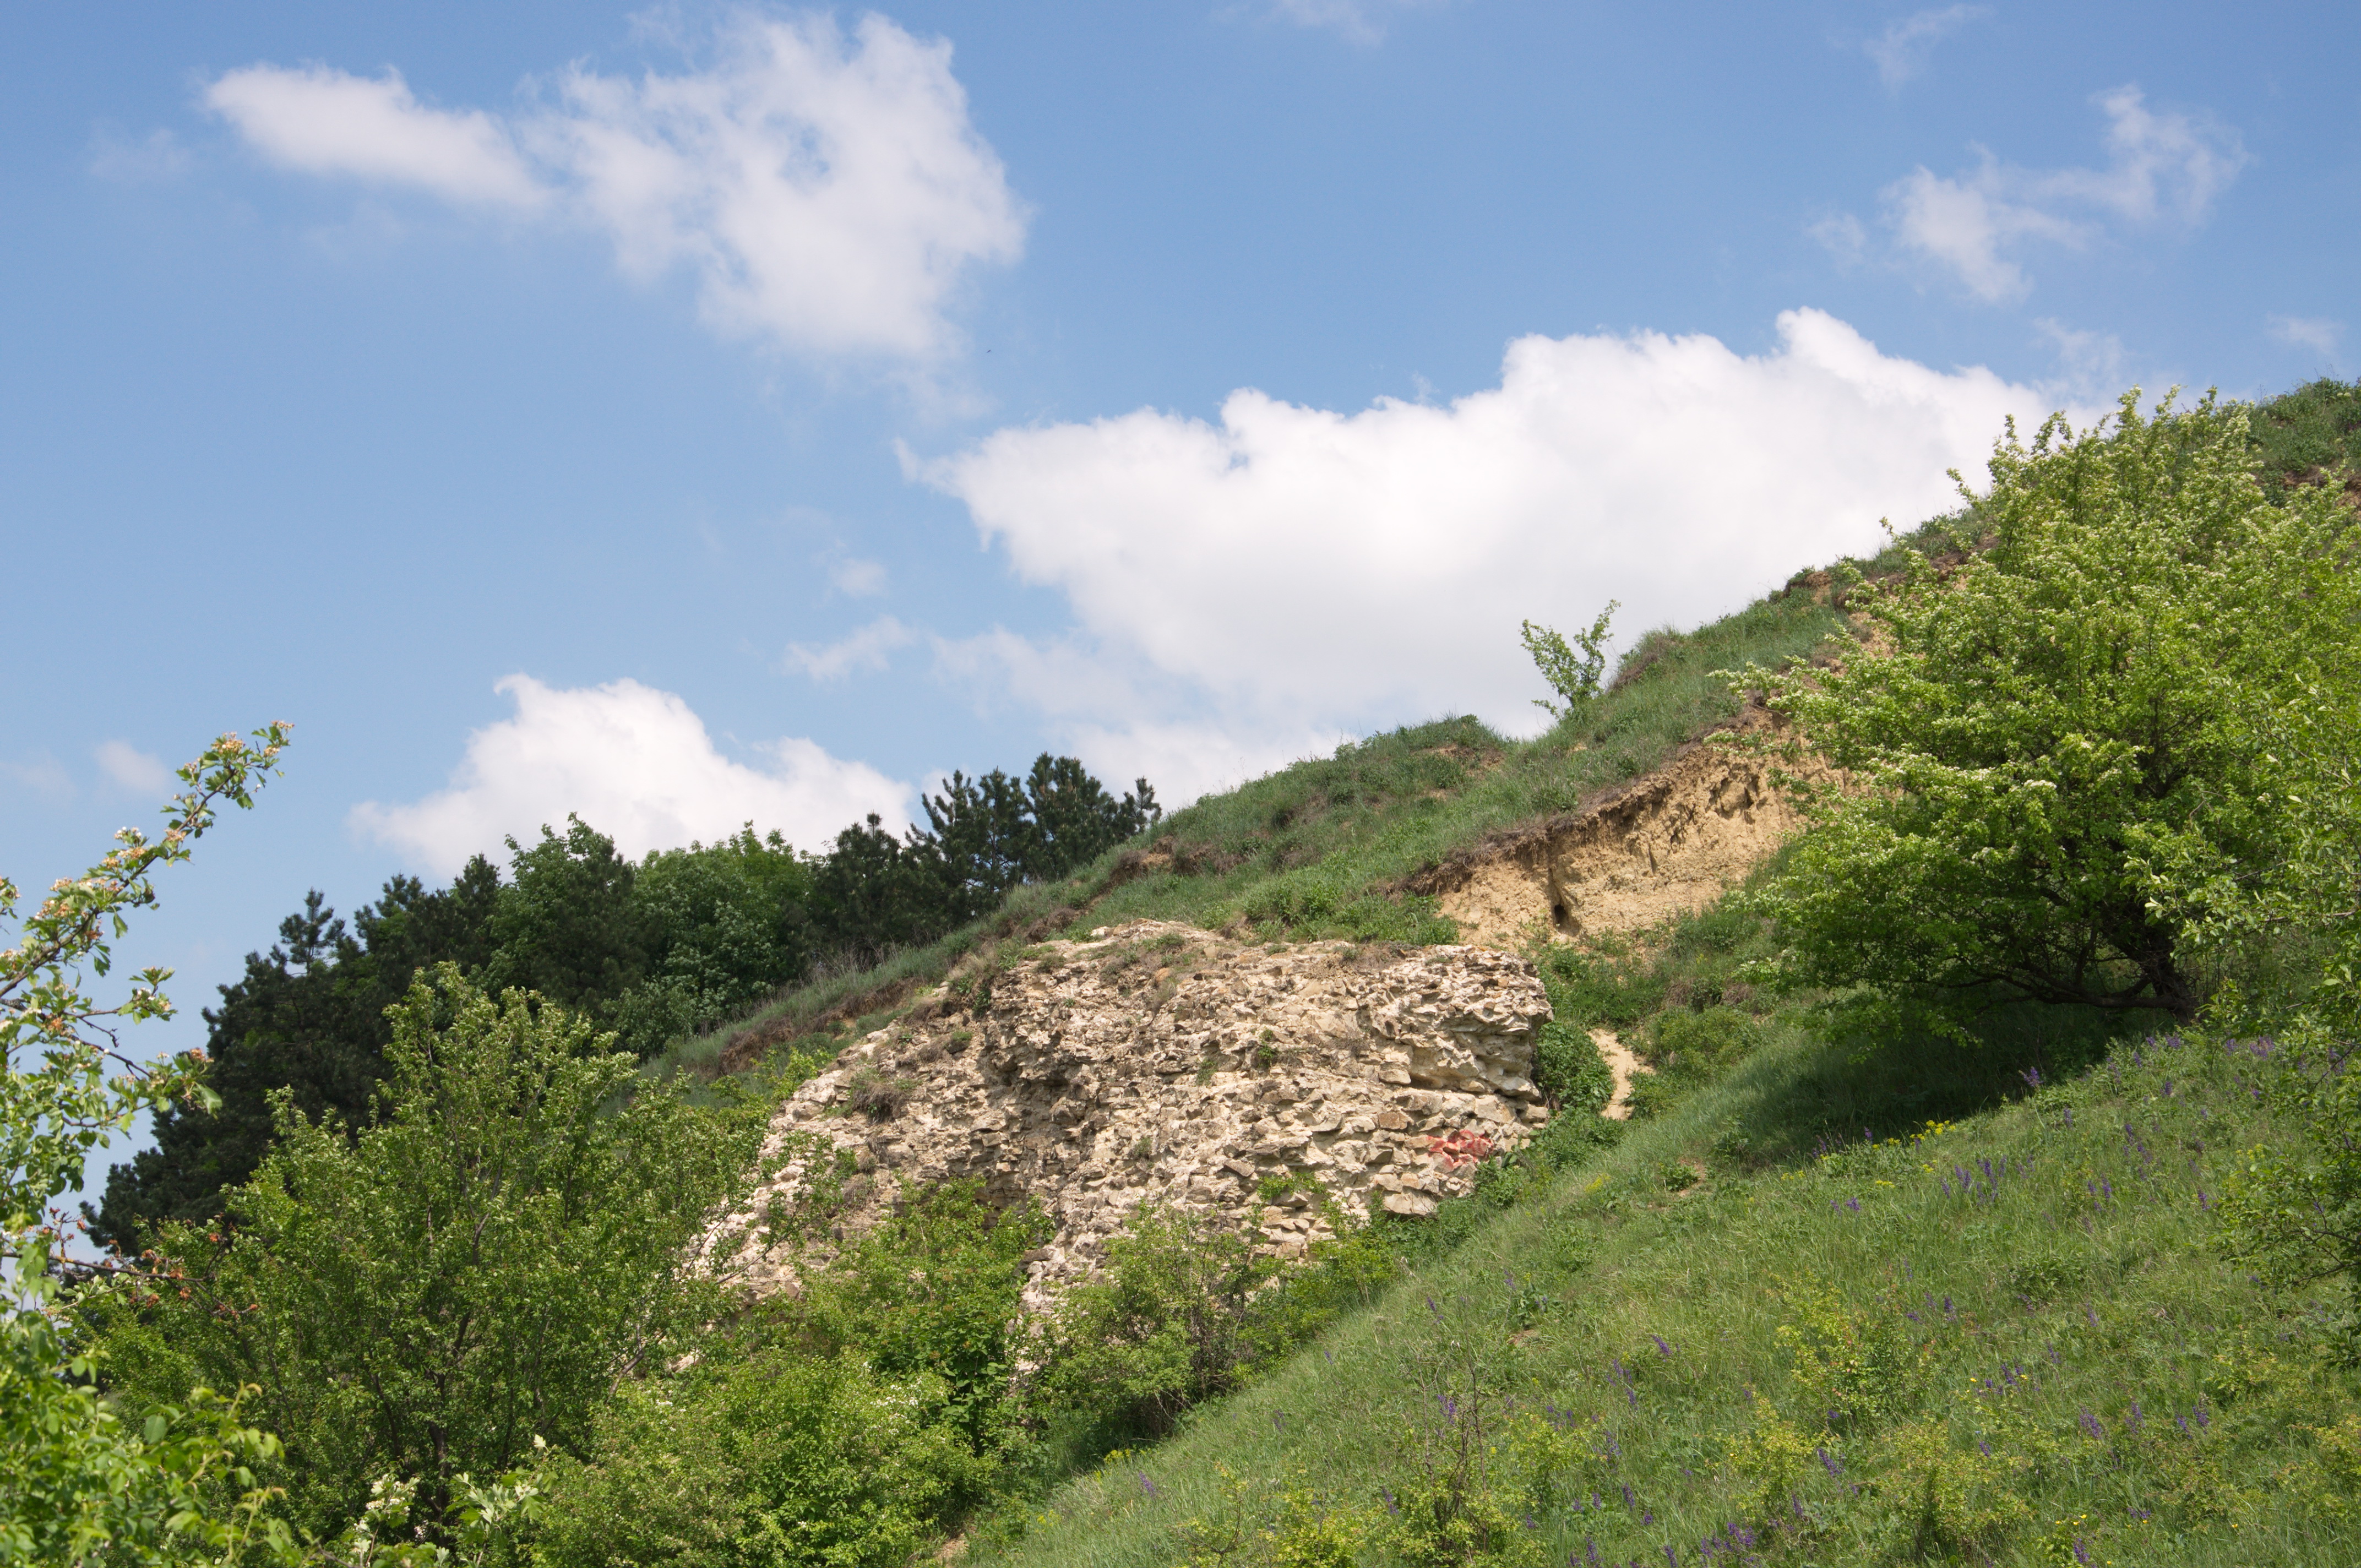 The Ruins of Șcheia Fortress